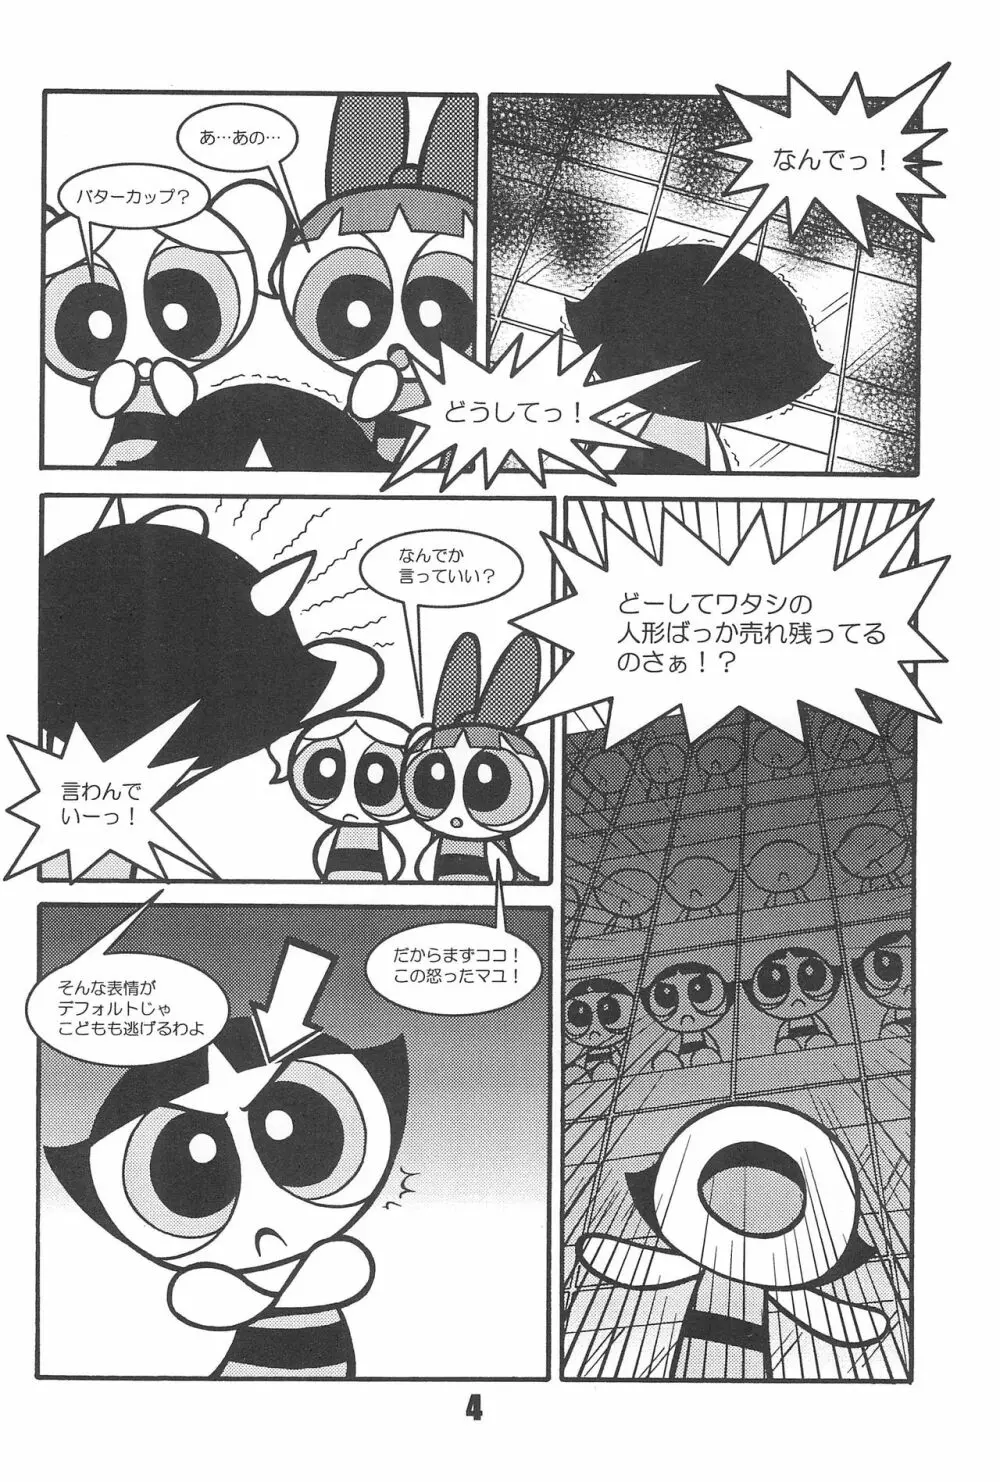 Show Goes On! Funhouse 22th - page4